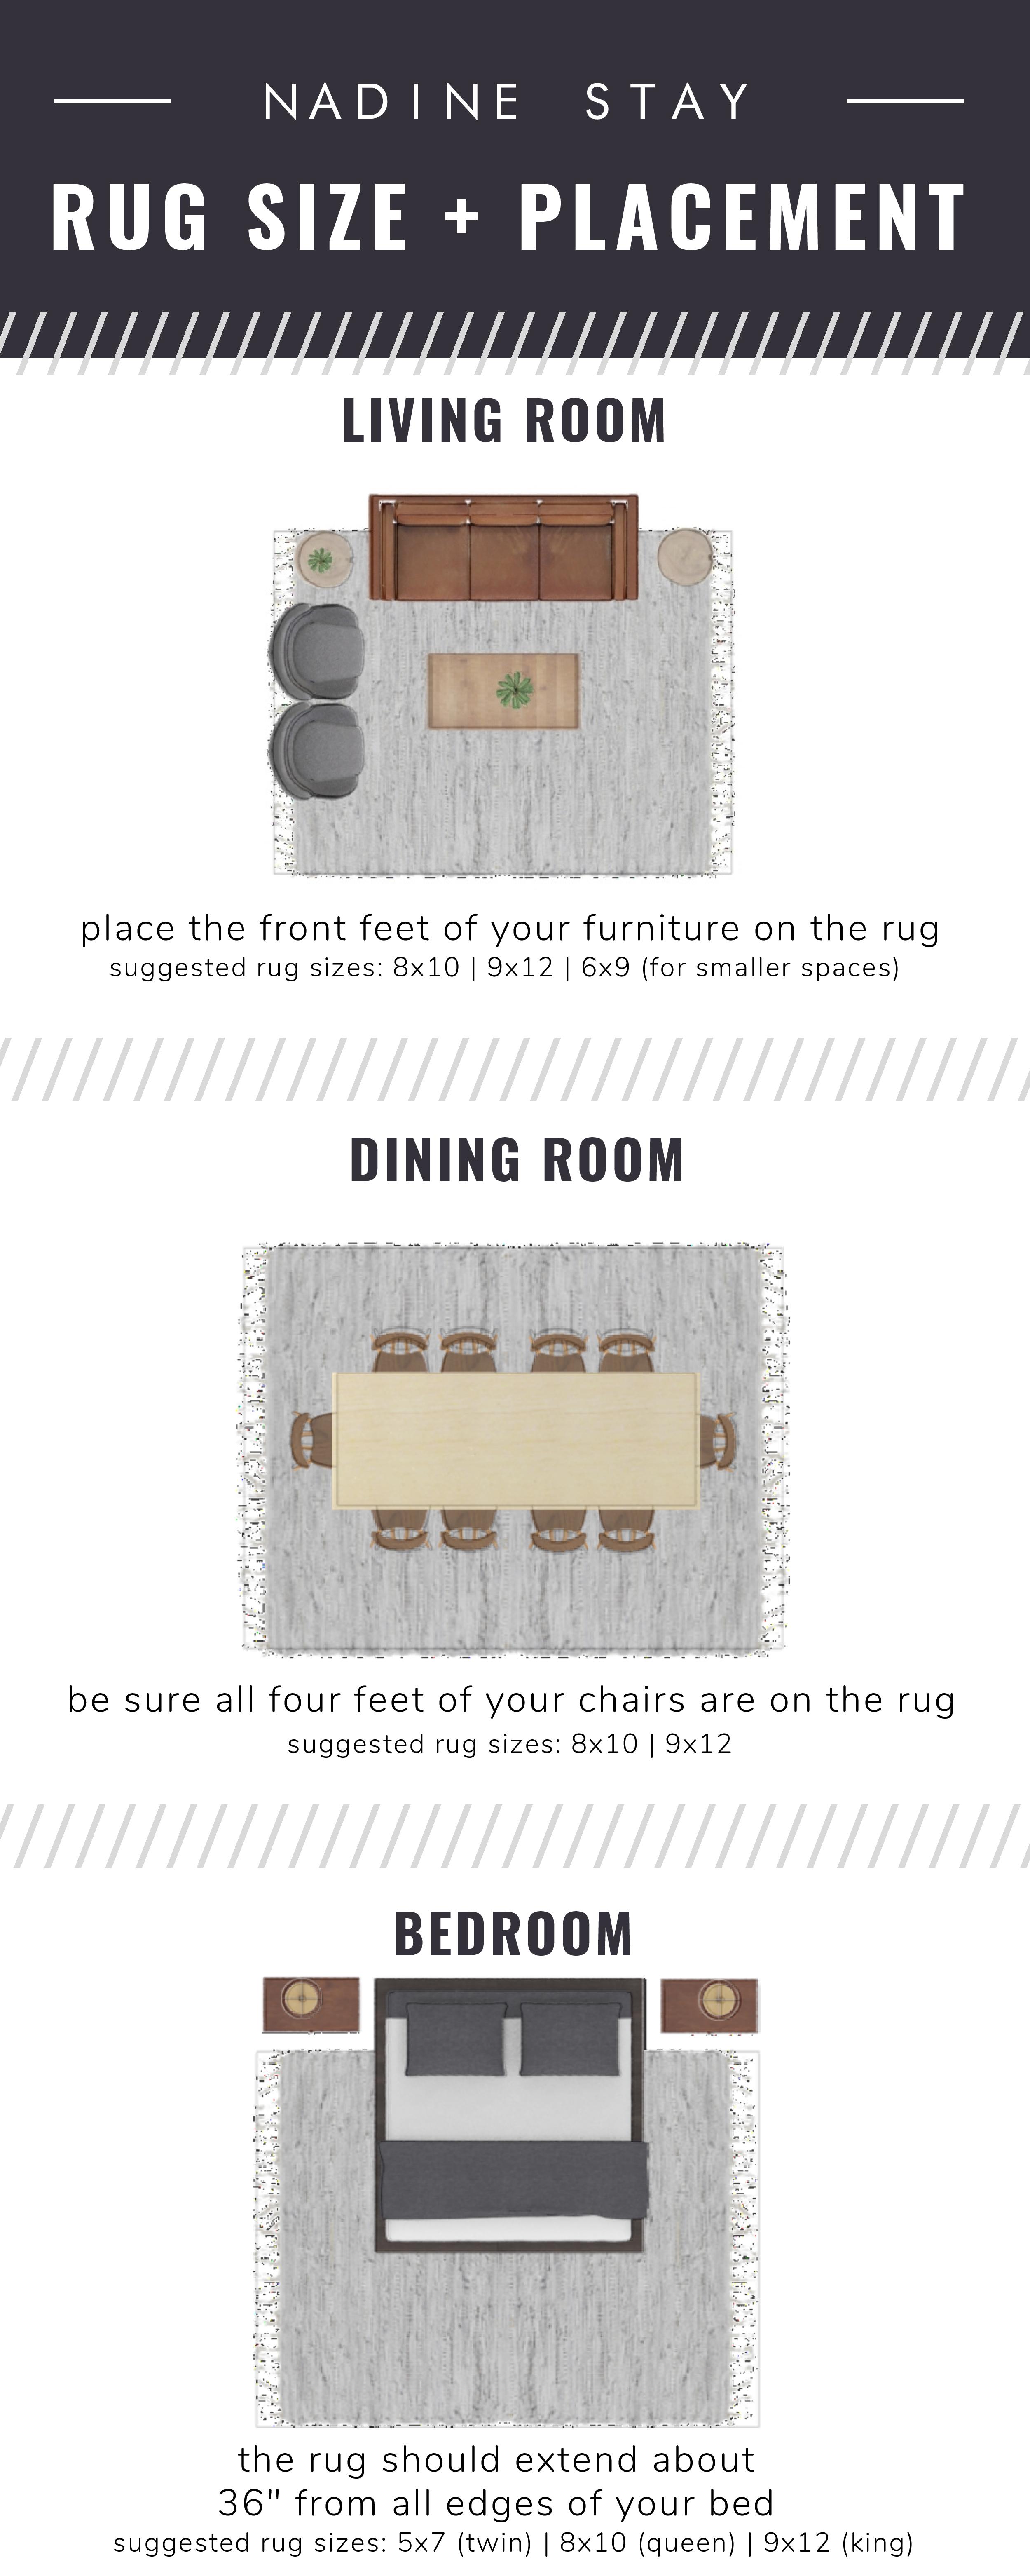 rug sizing and placement guide - what size rug do you need for your living room, bedroom, and dining room